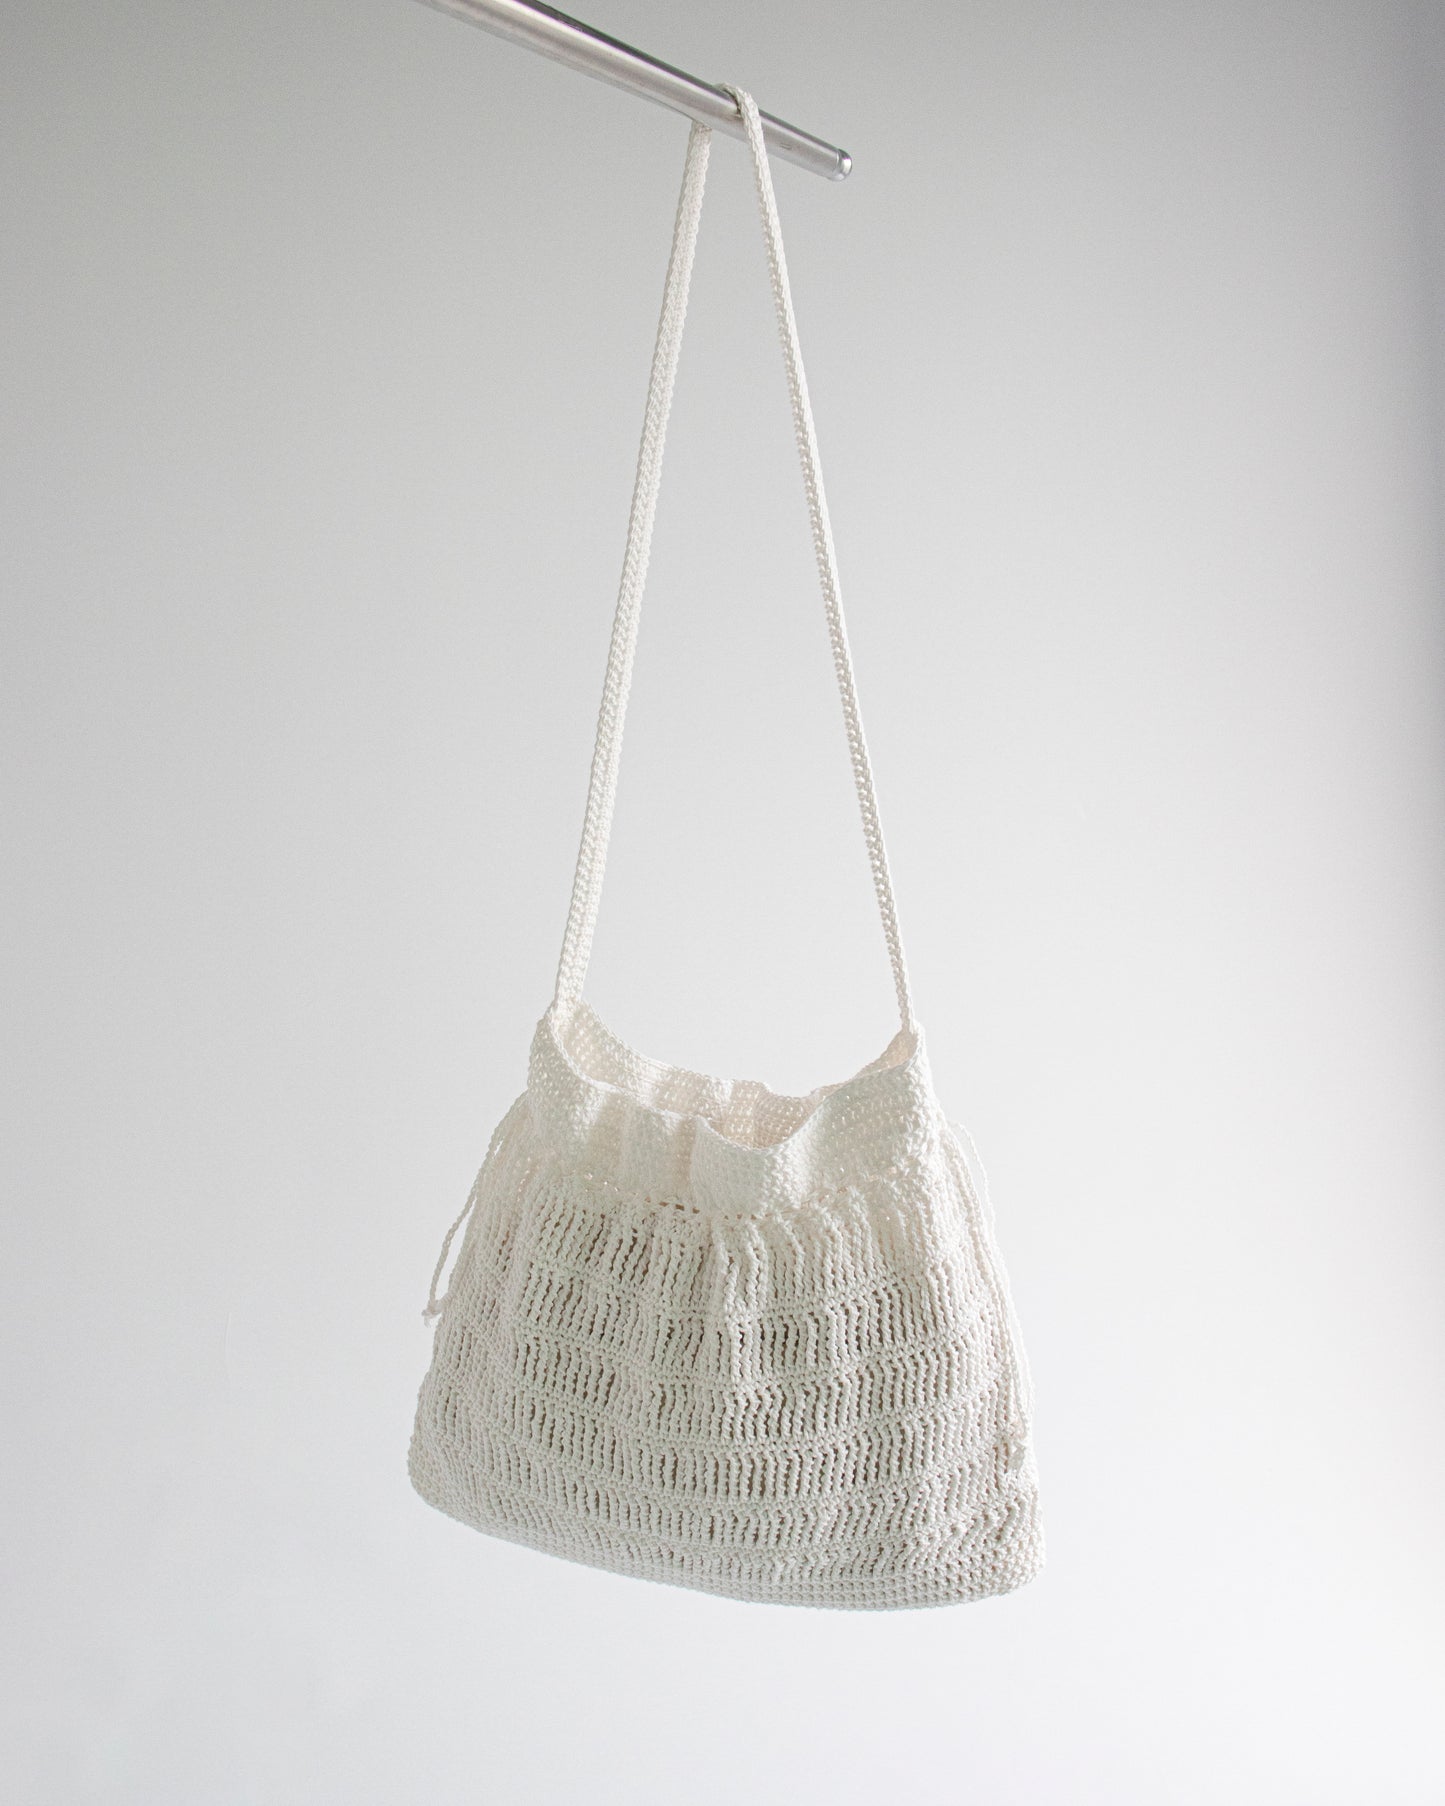 Any Cotton String Net Bag | Pattern ONLY